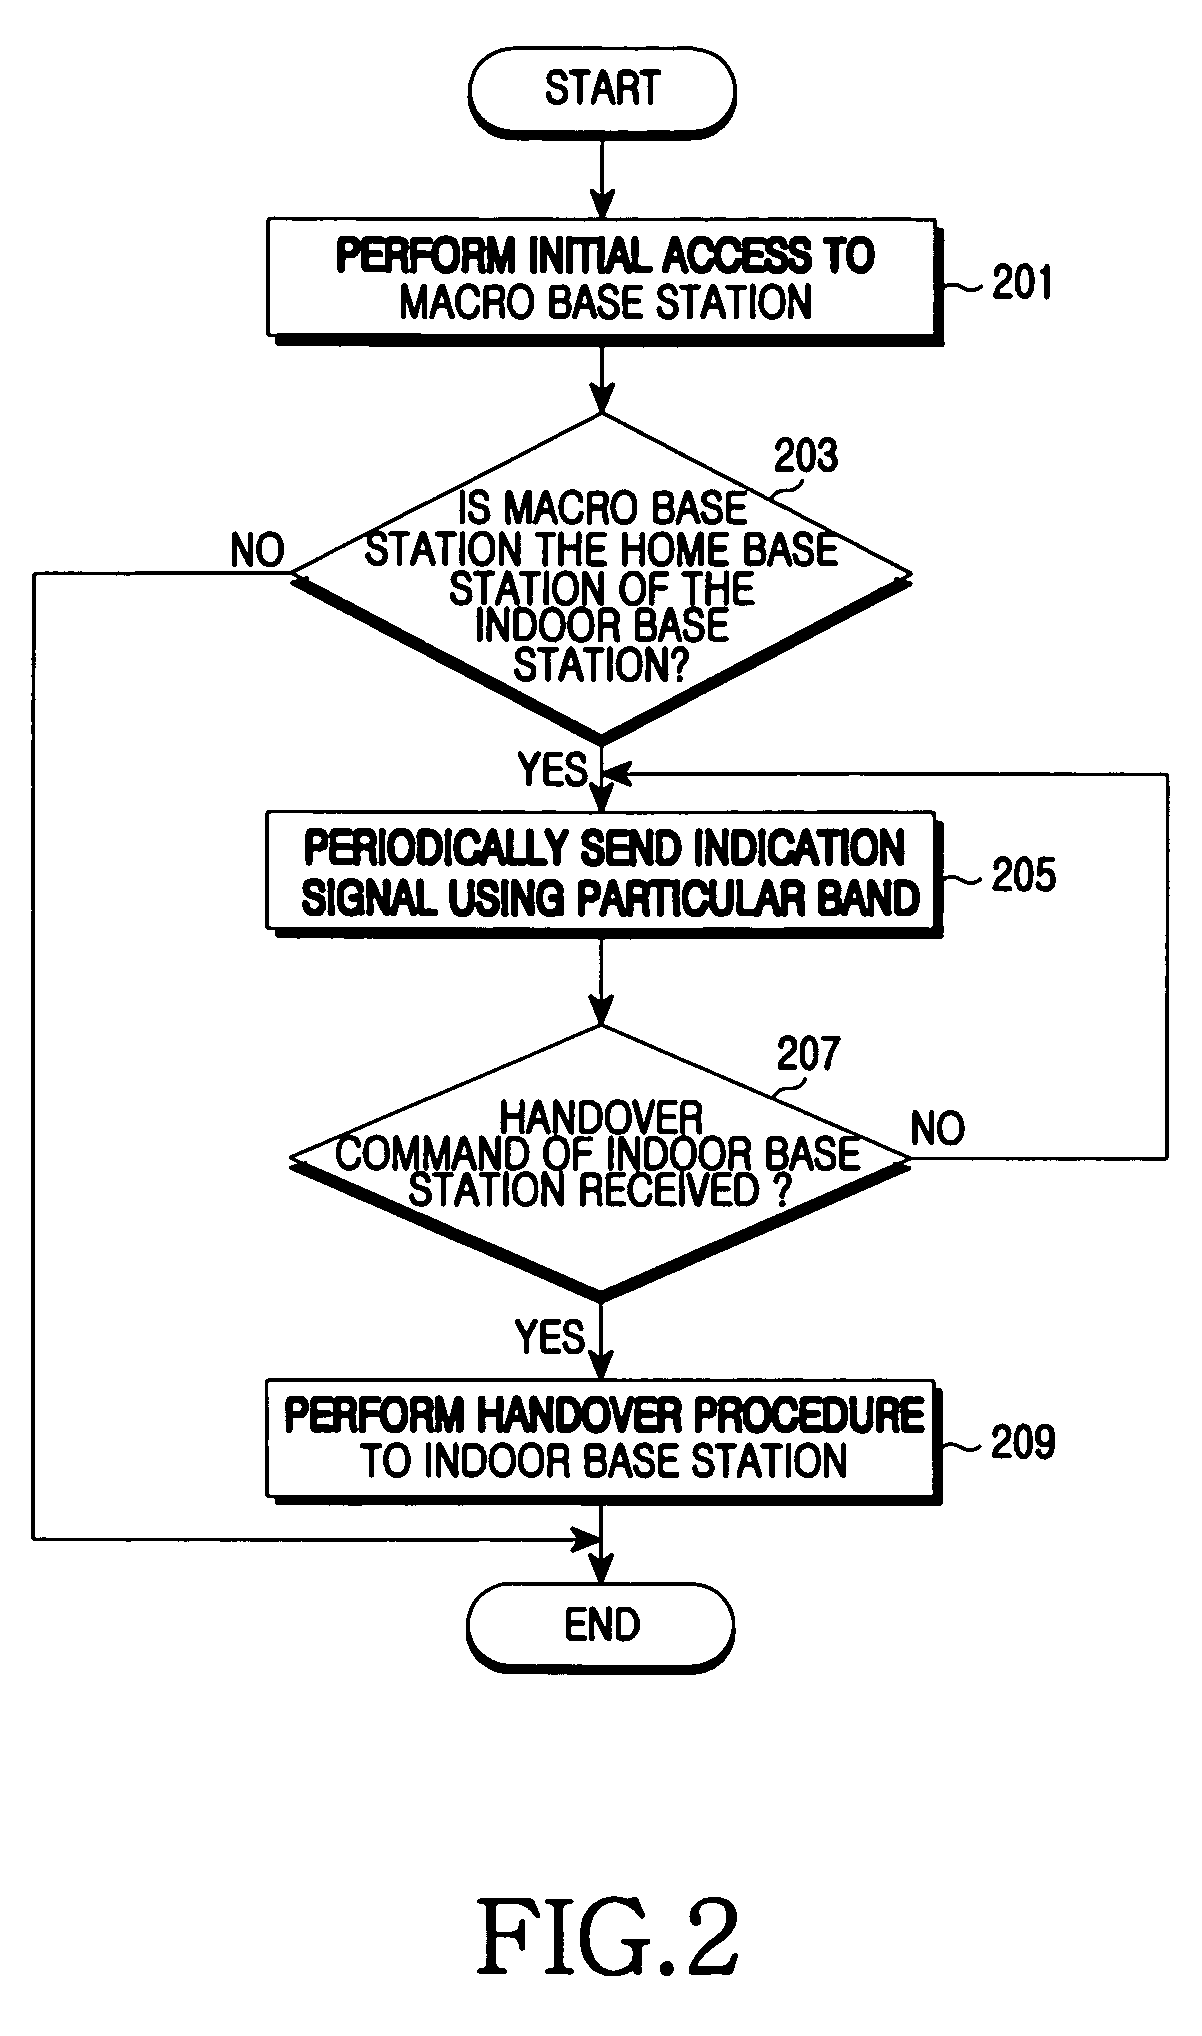 Apparatus and method for terminal handover between systems using different frequency allocations